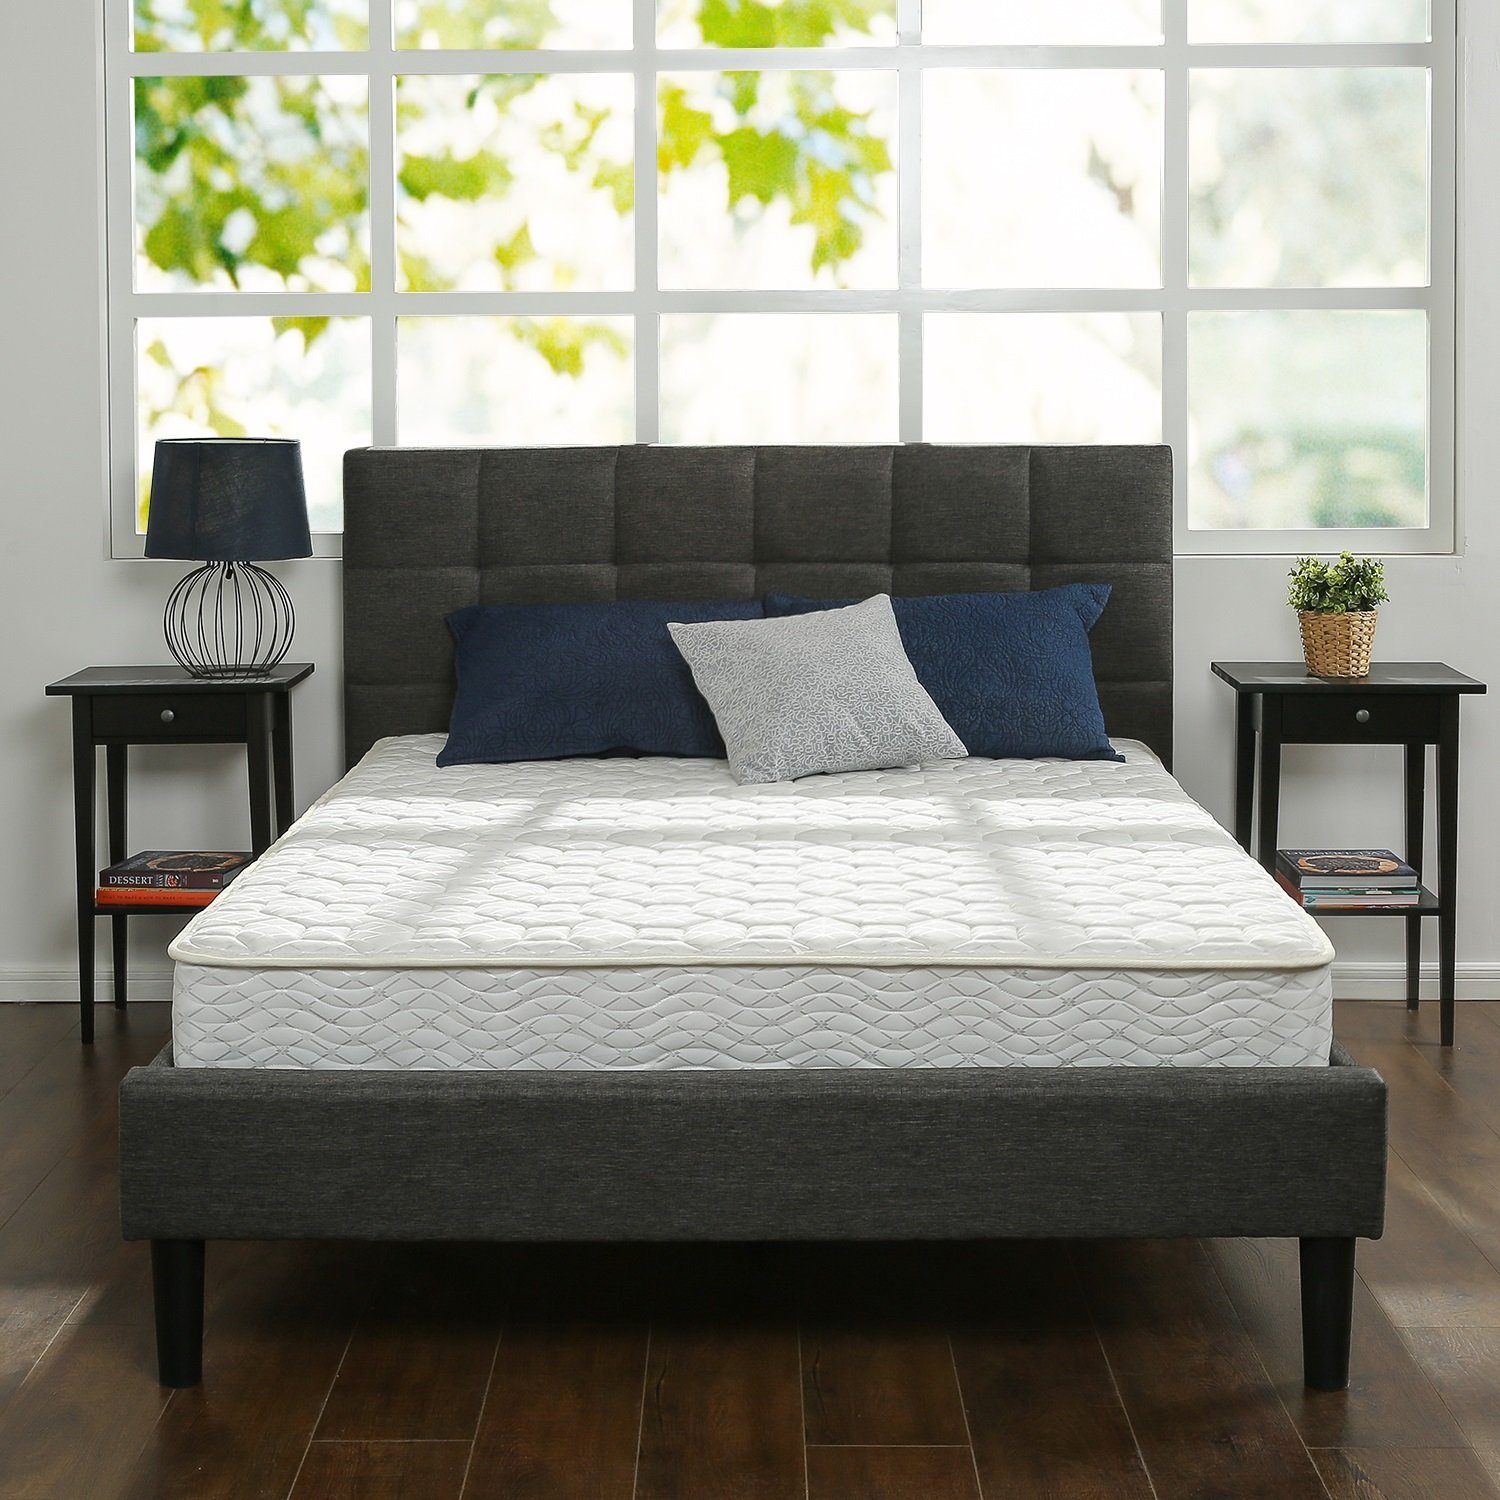 Zinus 8″ memory foam and spring king mattress for $170, queen for $110